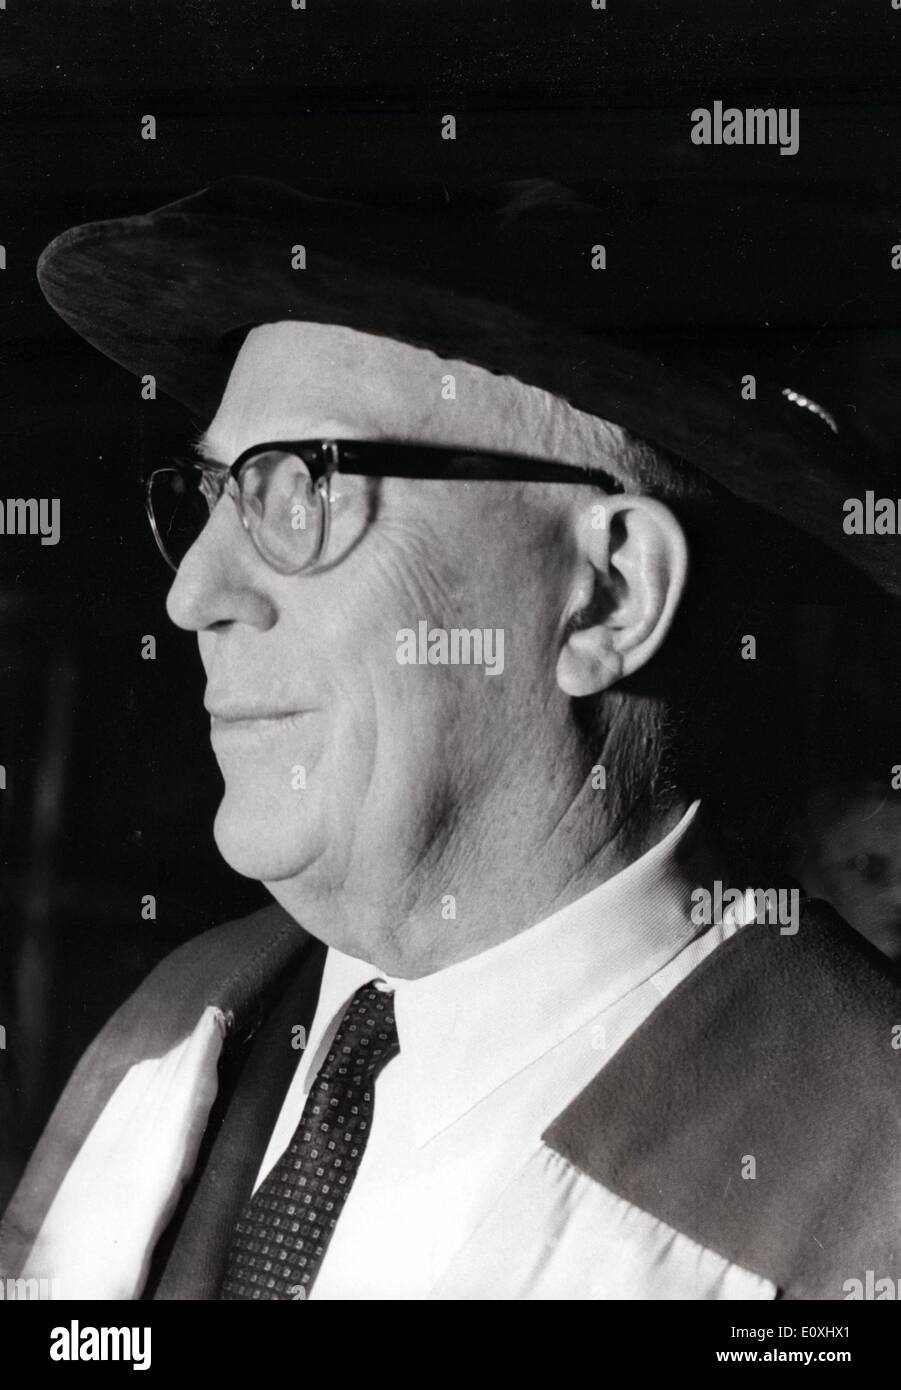 Jan. 01, 1967 - Montreal, Quebec, Canada - File Photo: circa 1967. Half a century after the historic ruling in Brown v. Board of Education that overturned segregated education, the US is marking 50 years of racial school integration. Supreme Chief Justice EARL WARREN, at the opening for the new McGill University Law School. In Brown v. Board of Education, Warren authored the landmark decision establishing that ''separate educational facilities are inherently unequal.'' This ruling overturned the previous holding of Plessy v. Ferguson. Stock Photo